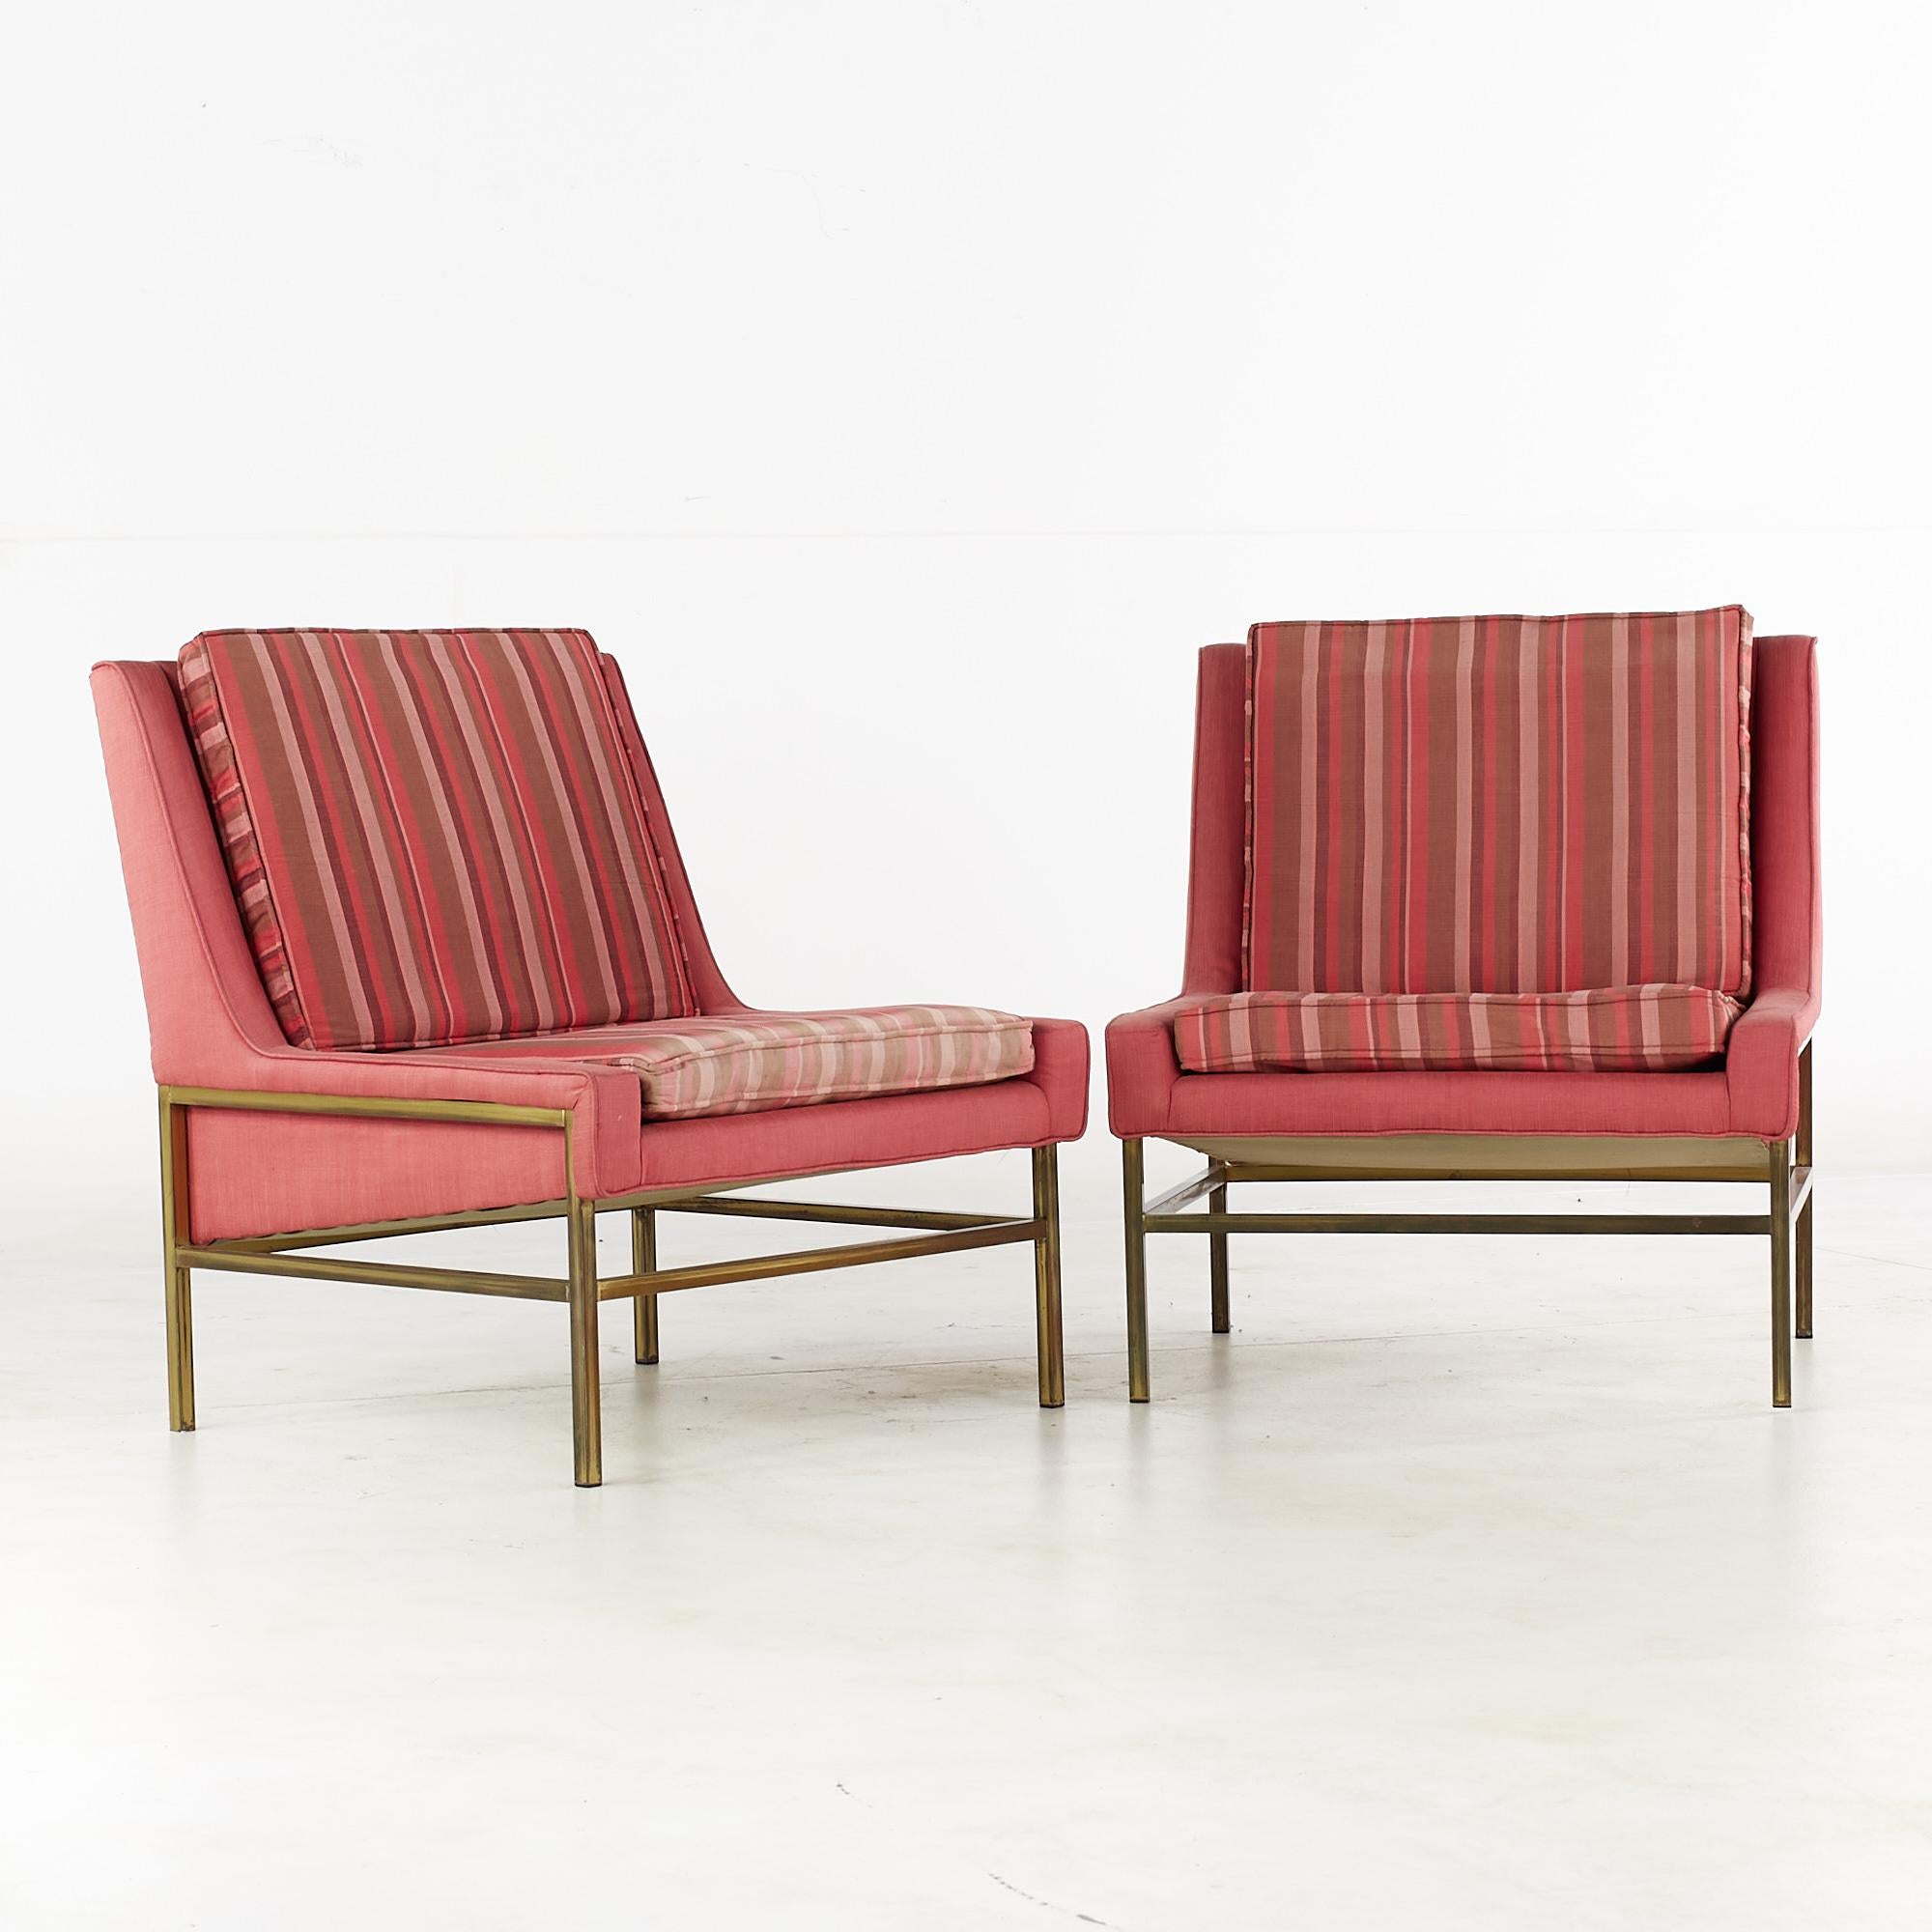 Ben Seibel for stand built furniture midcentury brass base slipper chairs - pair.

Each chair measures: 27.5 wide x 25.25 deep x 32 inches high, with a seat height / chair clearance of 16 inches.

All pieces of furniture can be had in what we